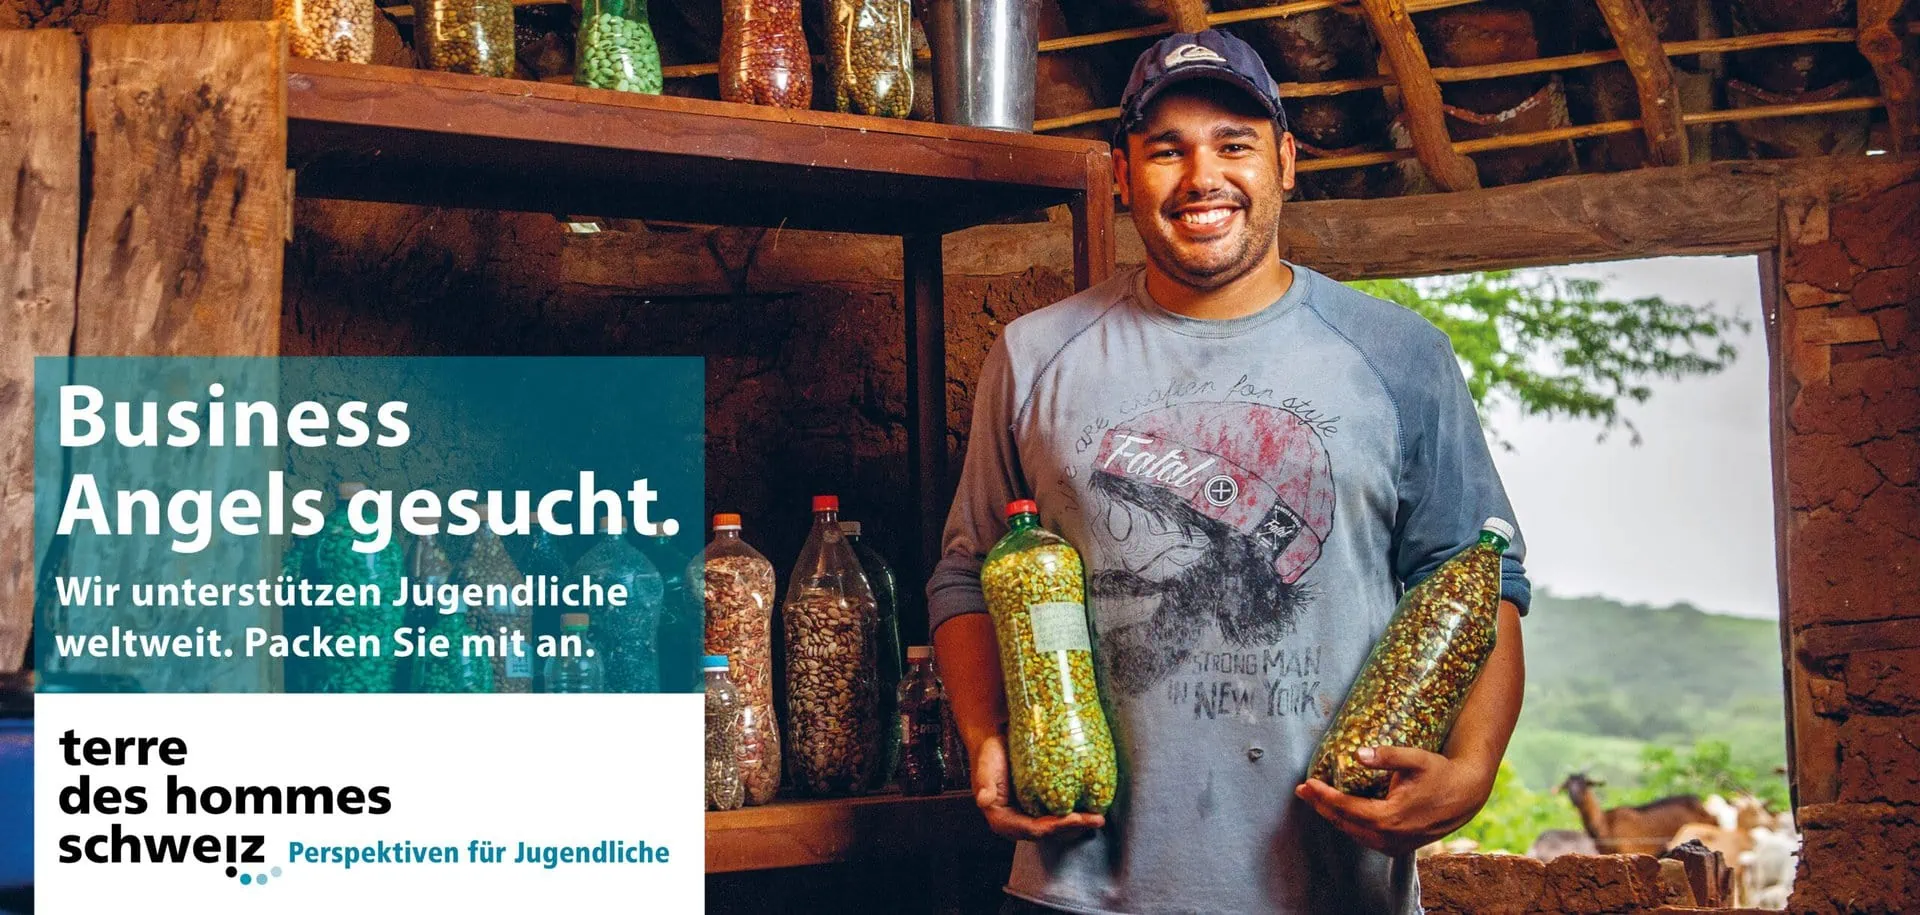 Young-man-happily-and-proudly-holding-two-seed-filled-pet-bottles-in-his-hands